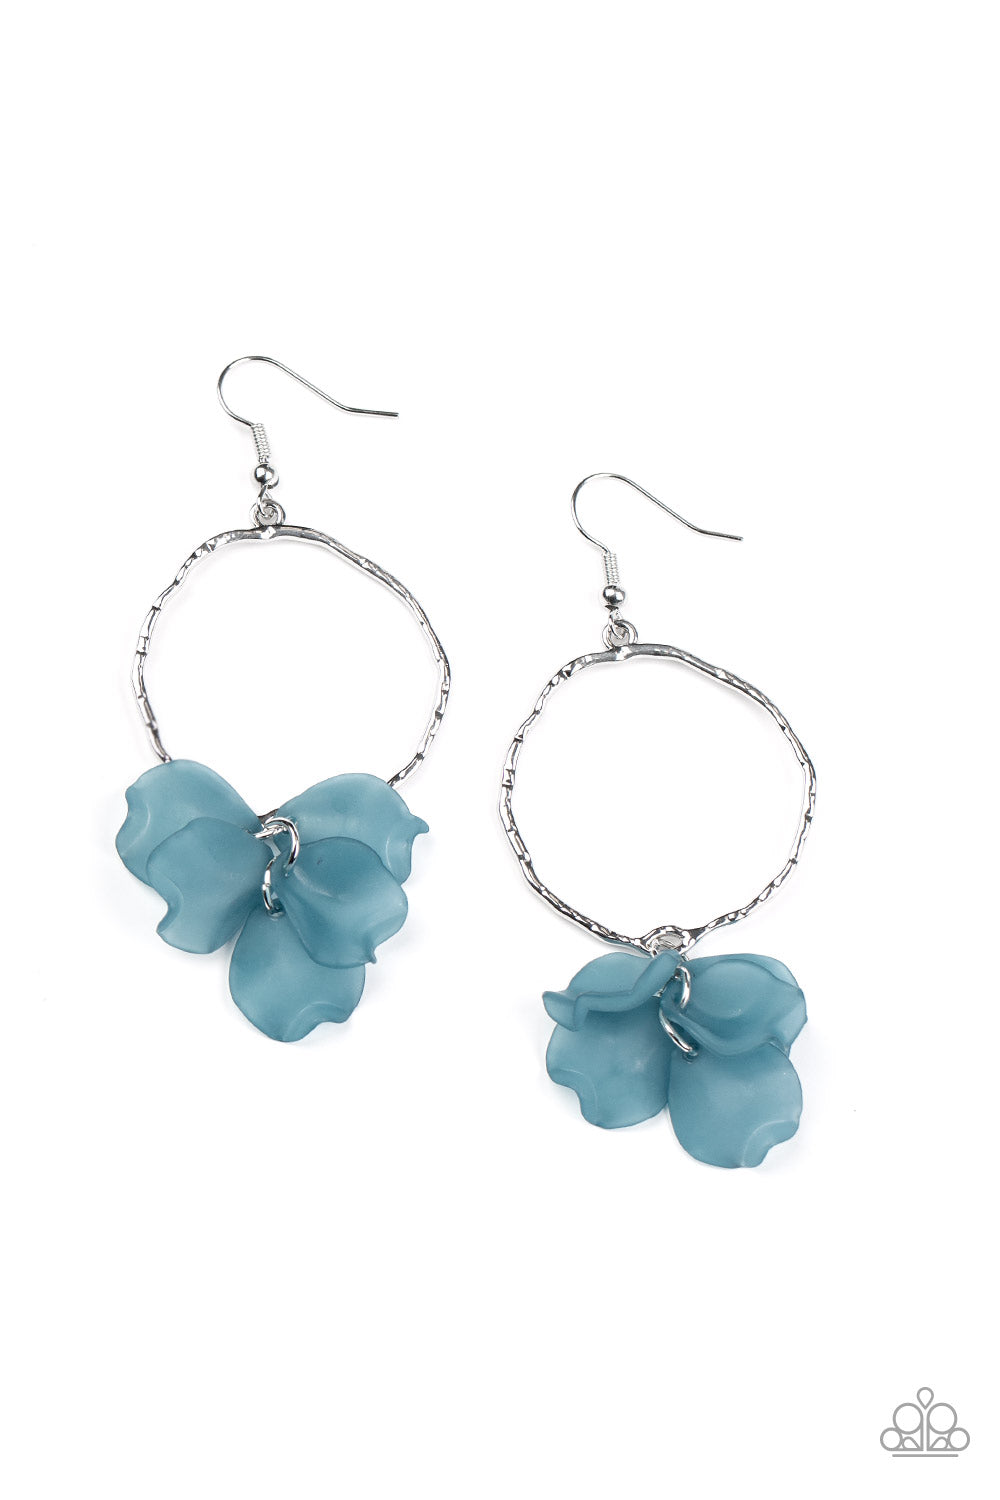 Paparazzi Accessories Petals on the Floor - Blue Acrylic Earrings - Lady T Accessories